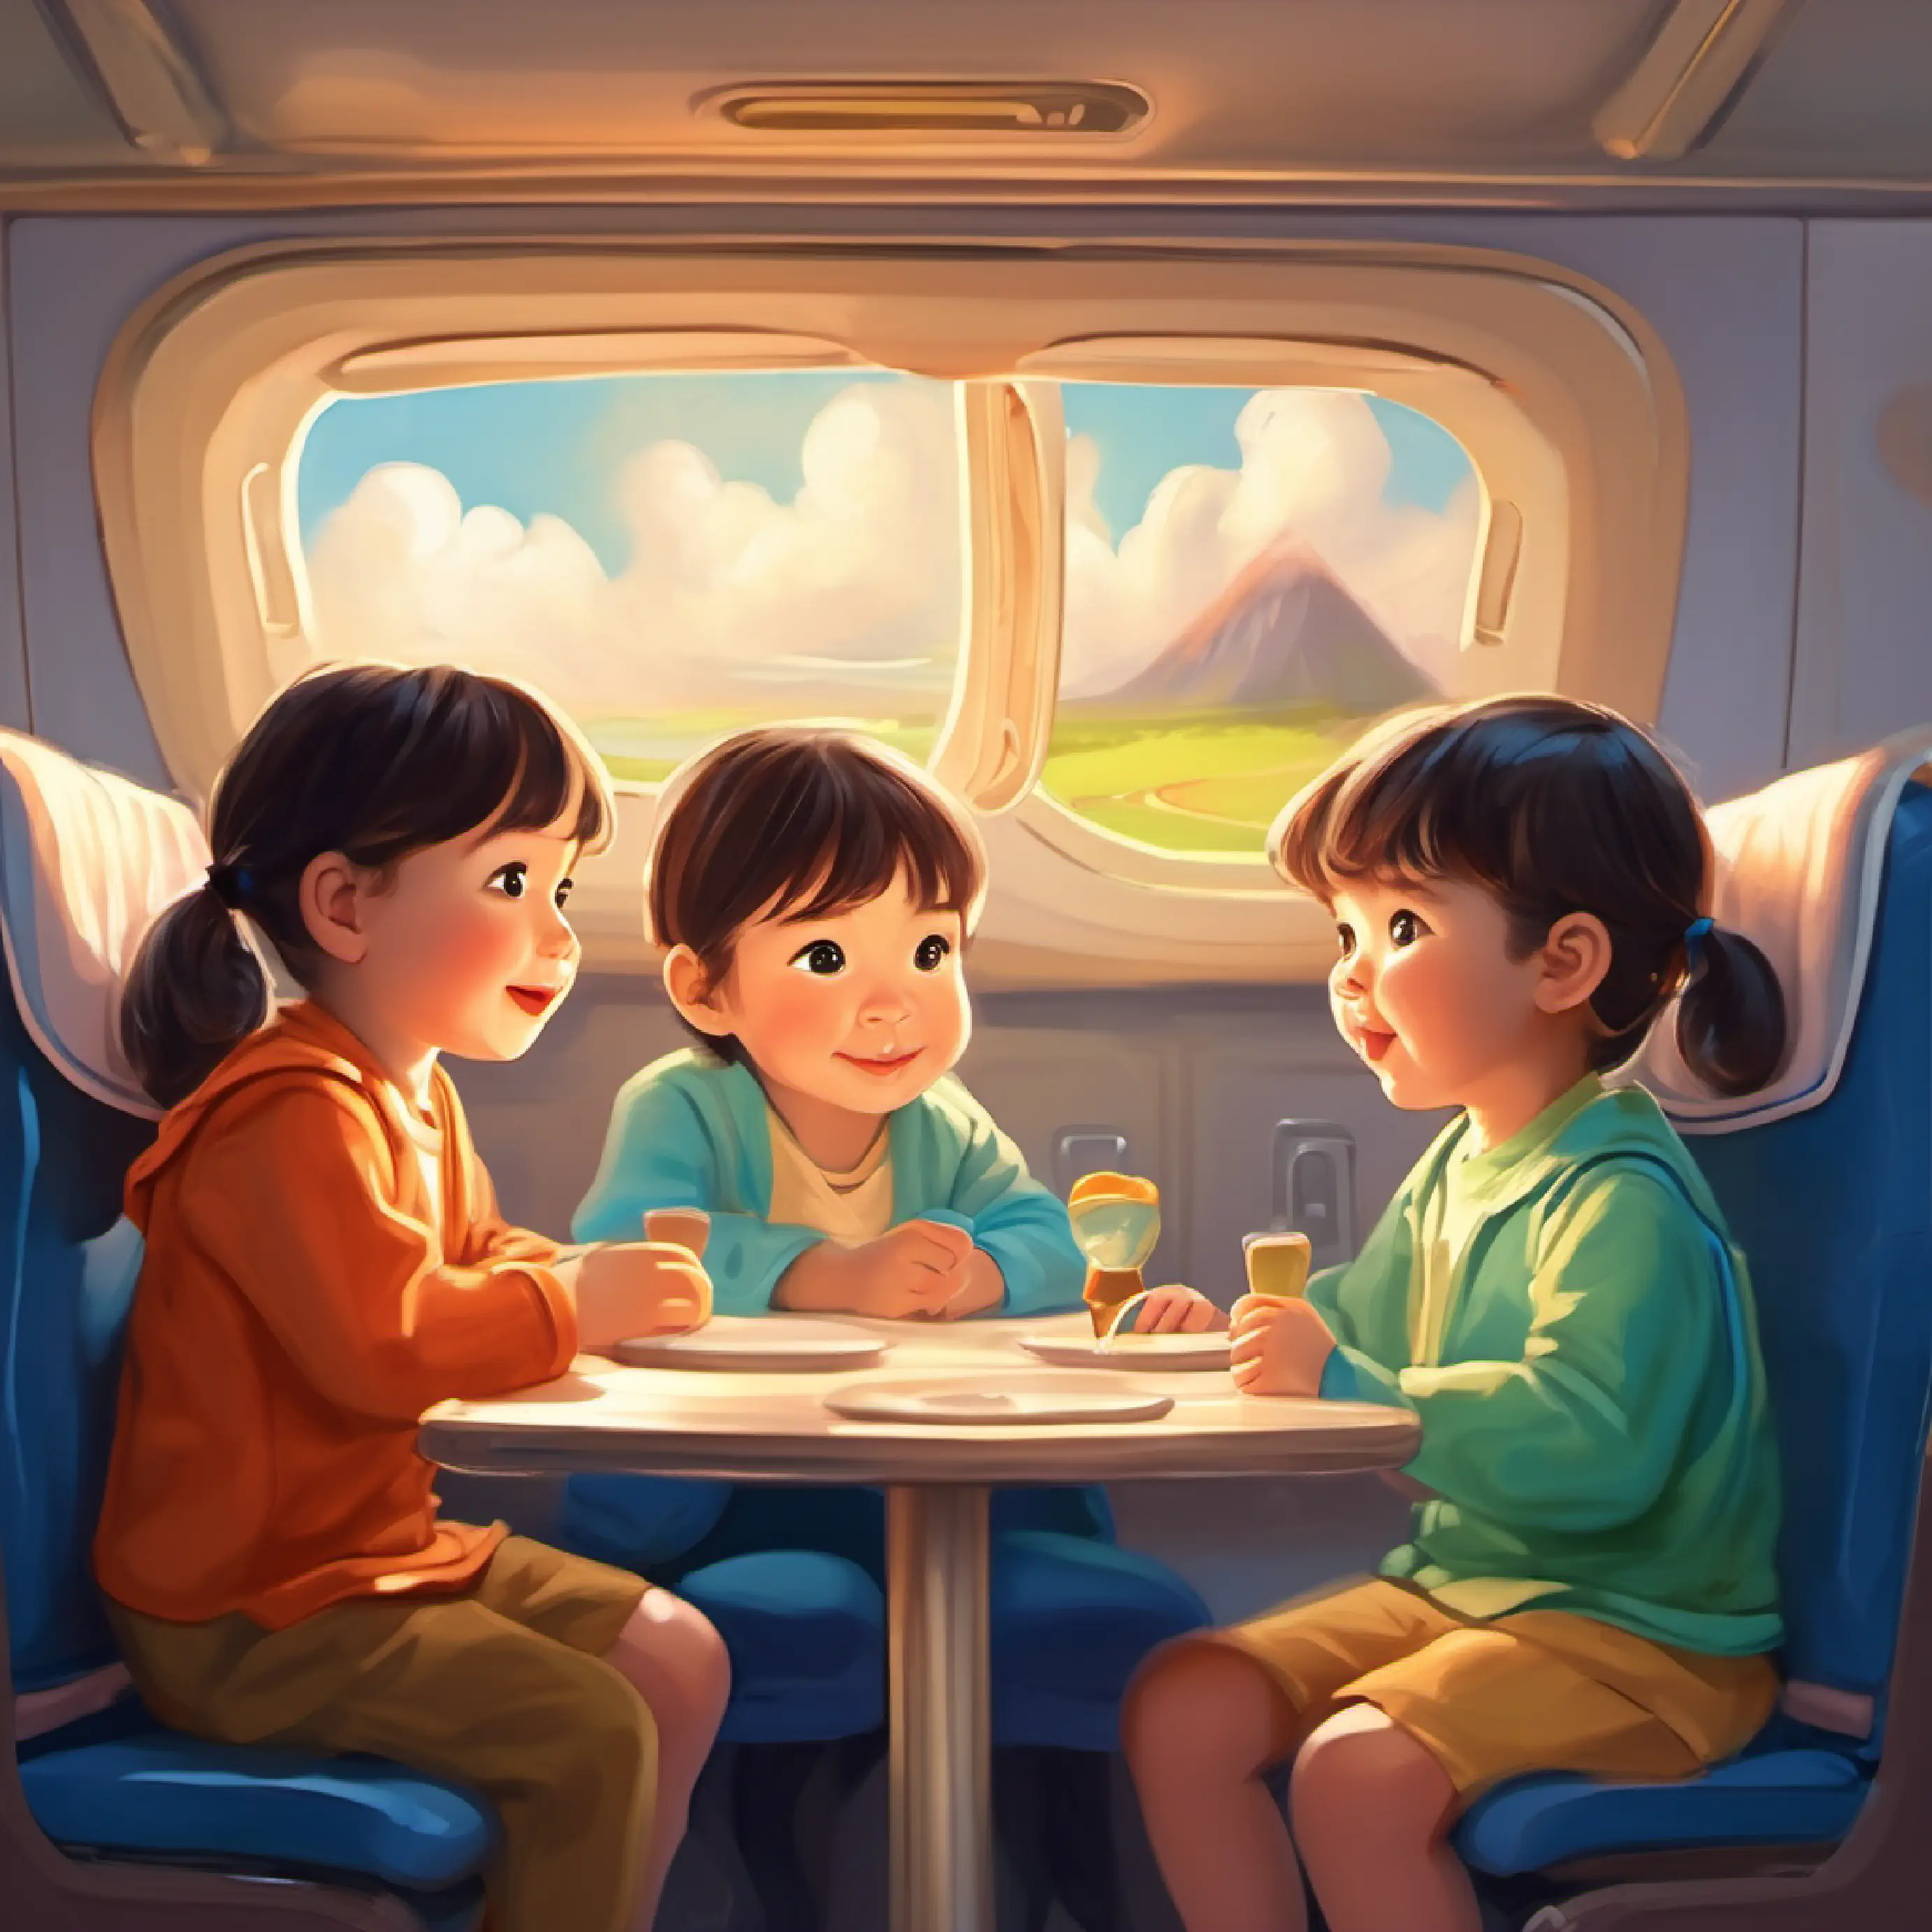 Triplets learn about sharing through the airplane stories.